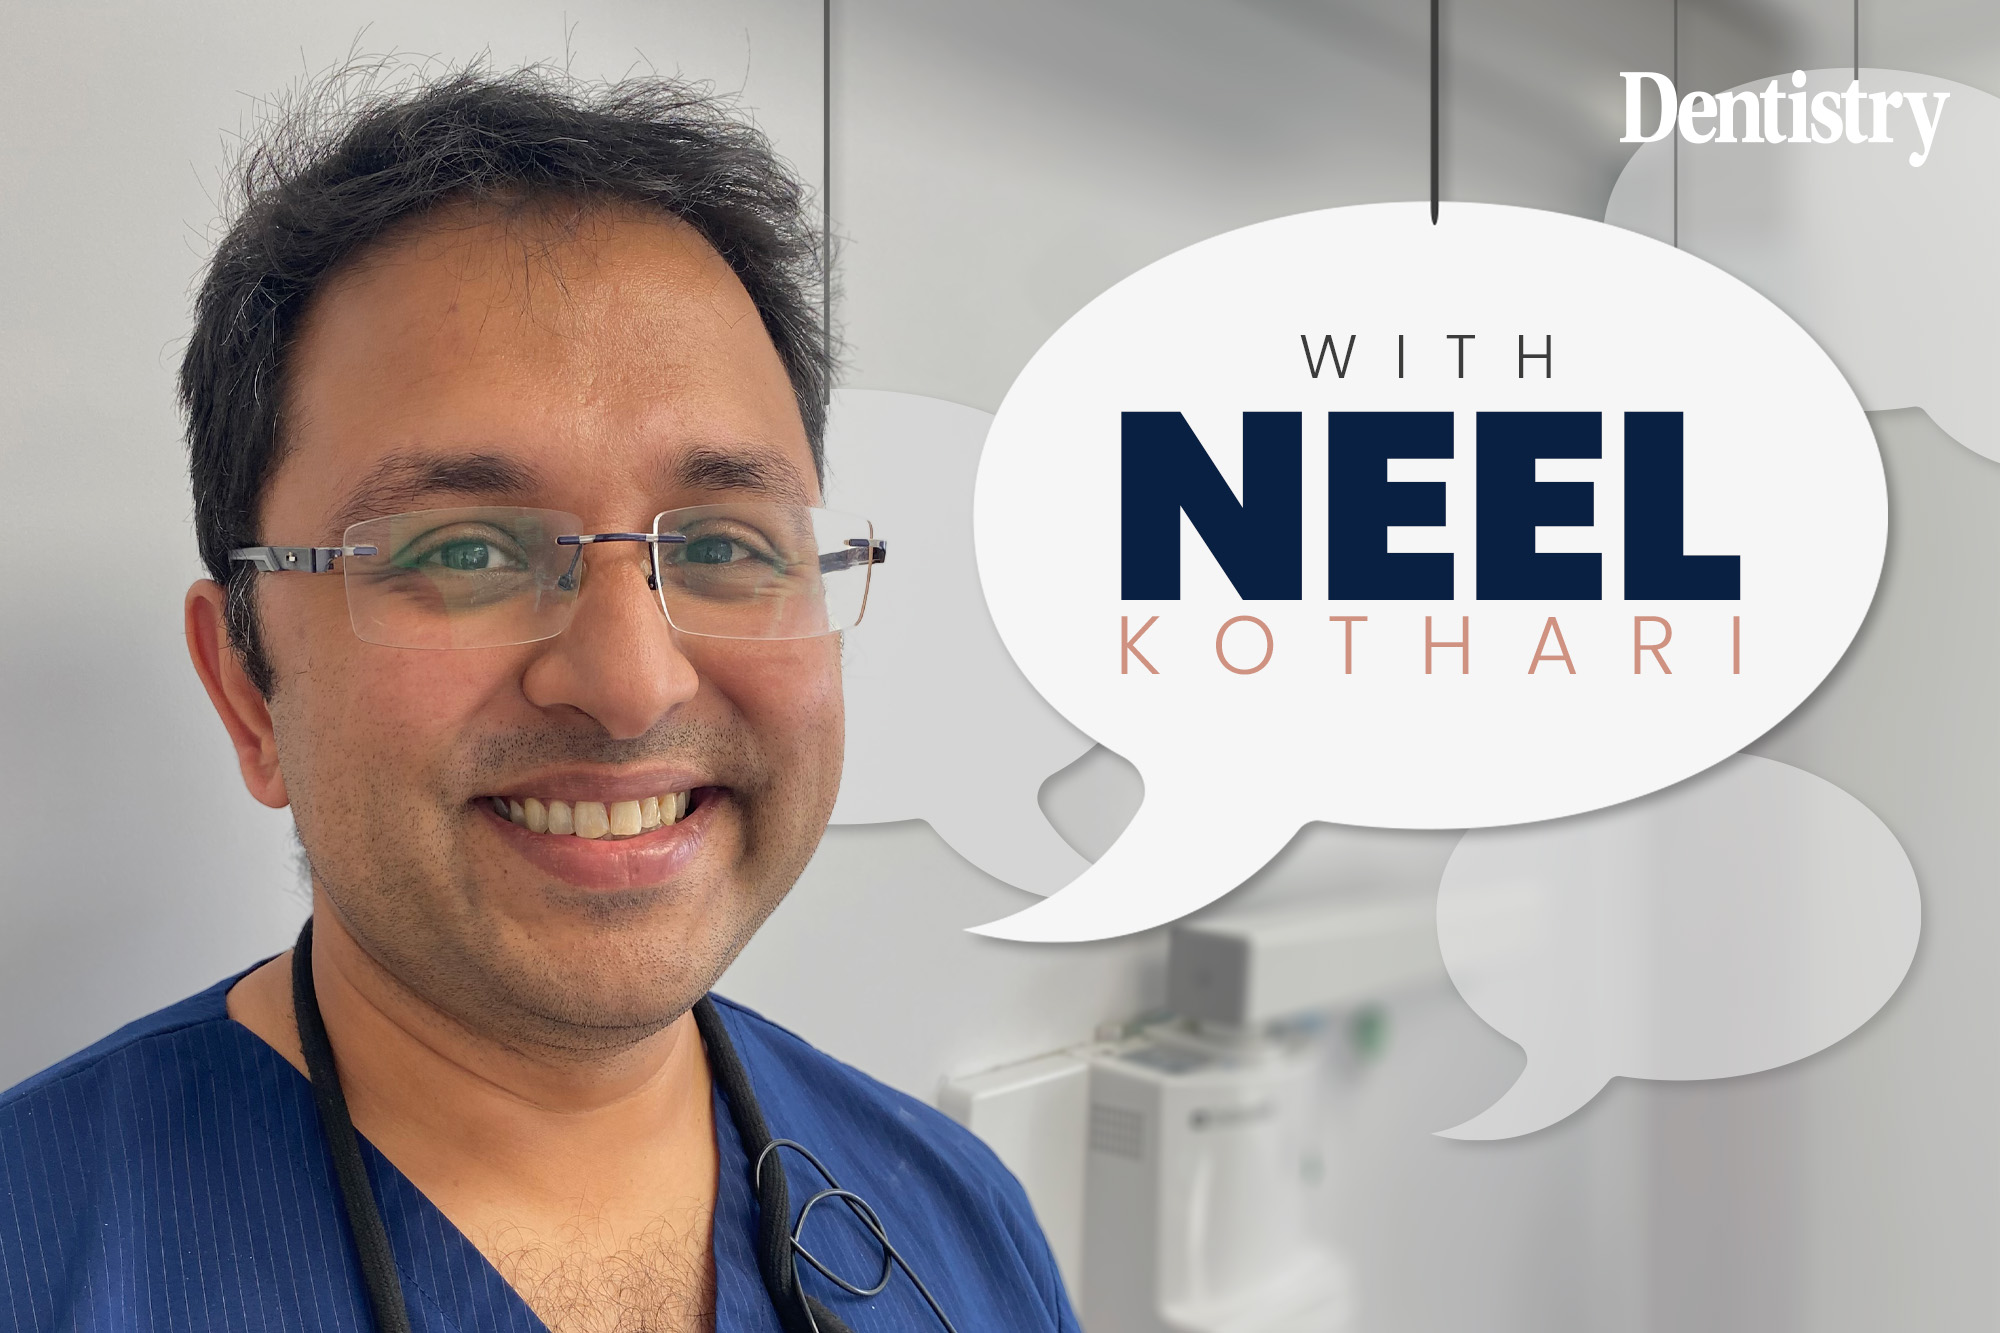 Neel Kothari explores why the UK dental sector might not live up to expectations for overseas professionals.